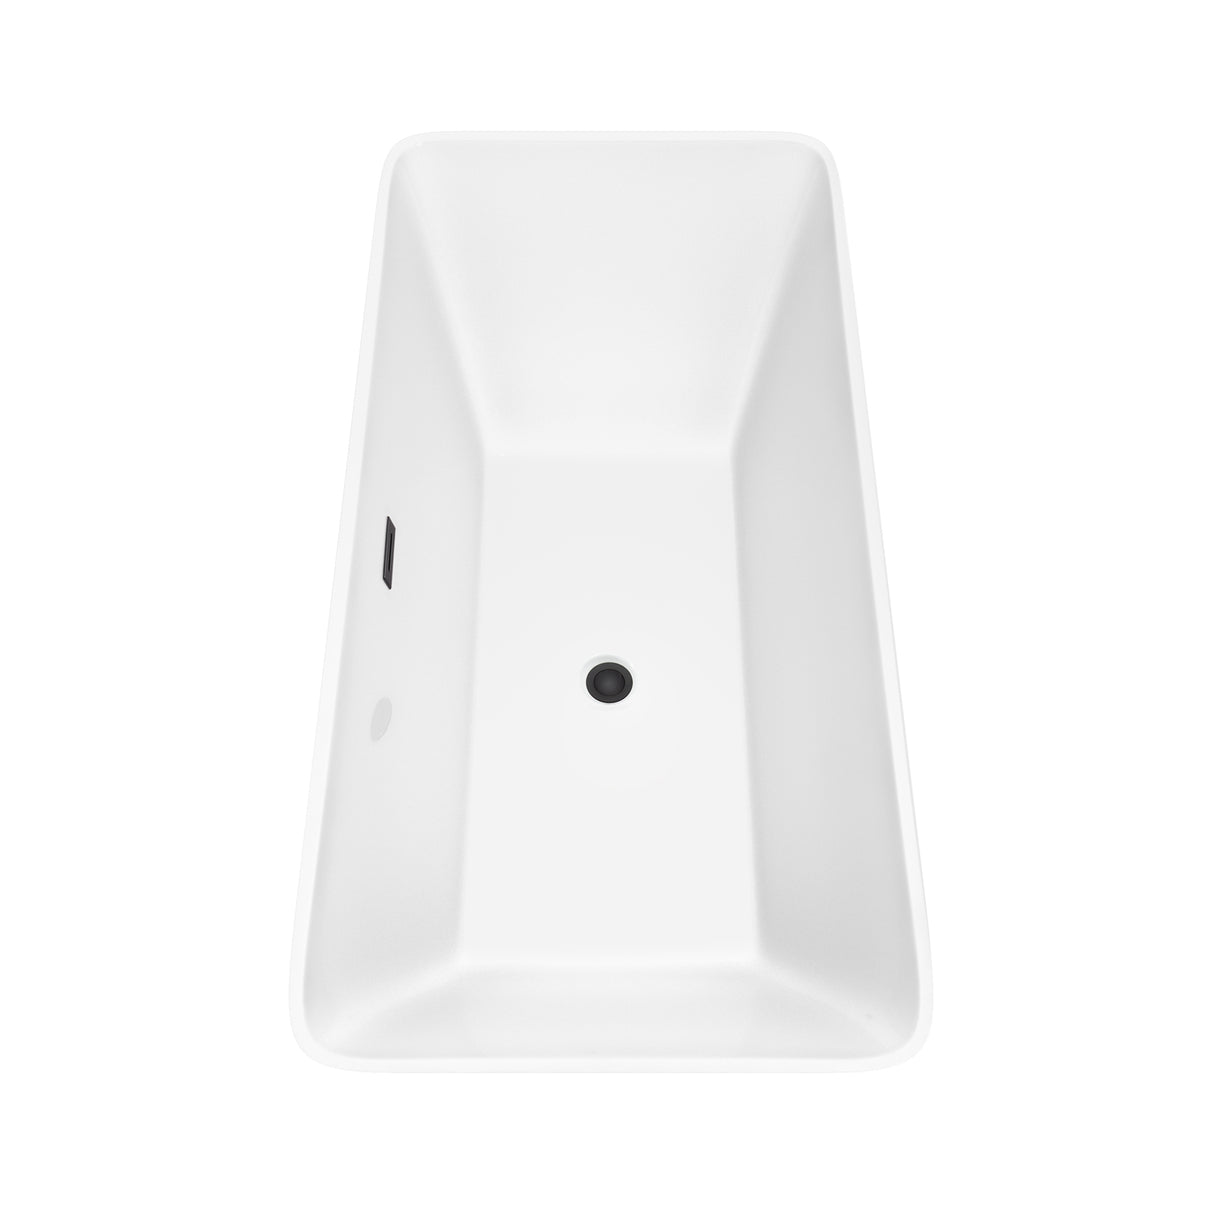 Tiffany 67 Inch Freestanding Bathtub in White with Matte Black Drain and Overflow Trim